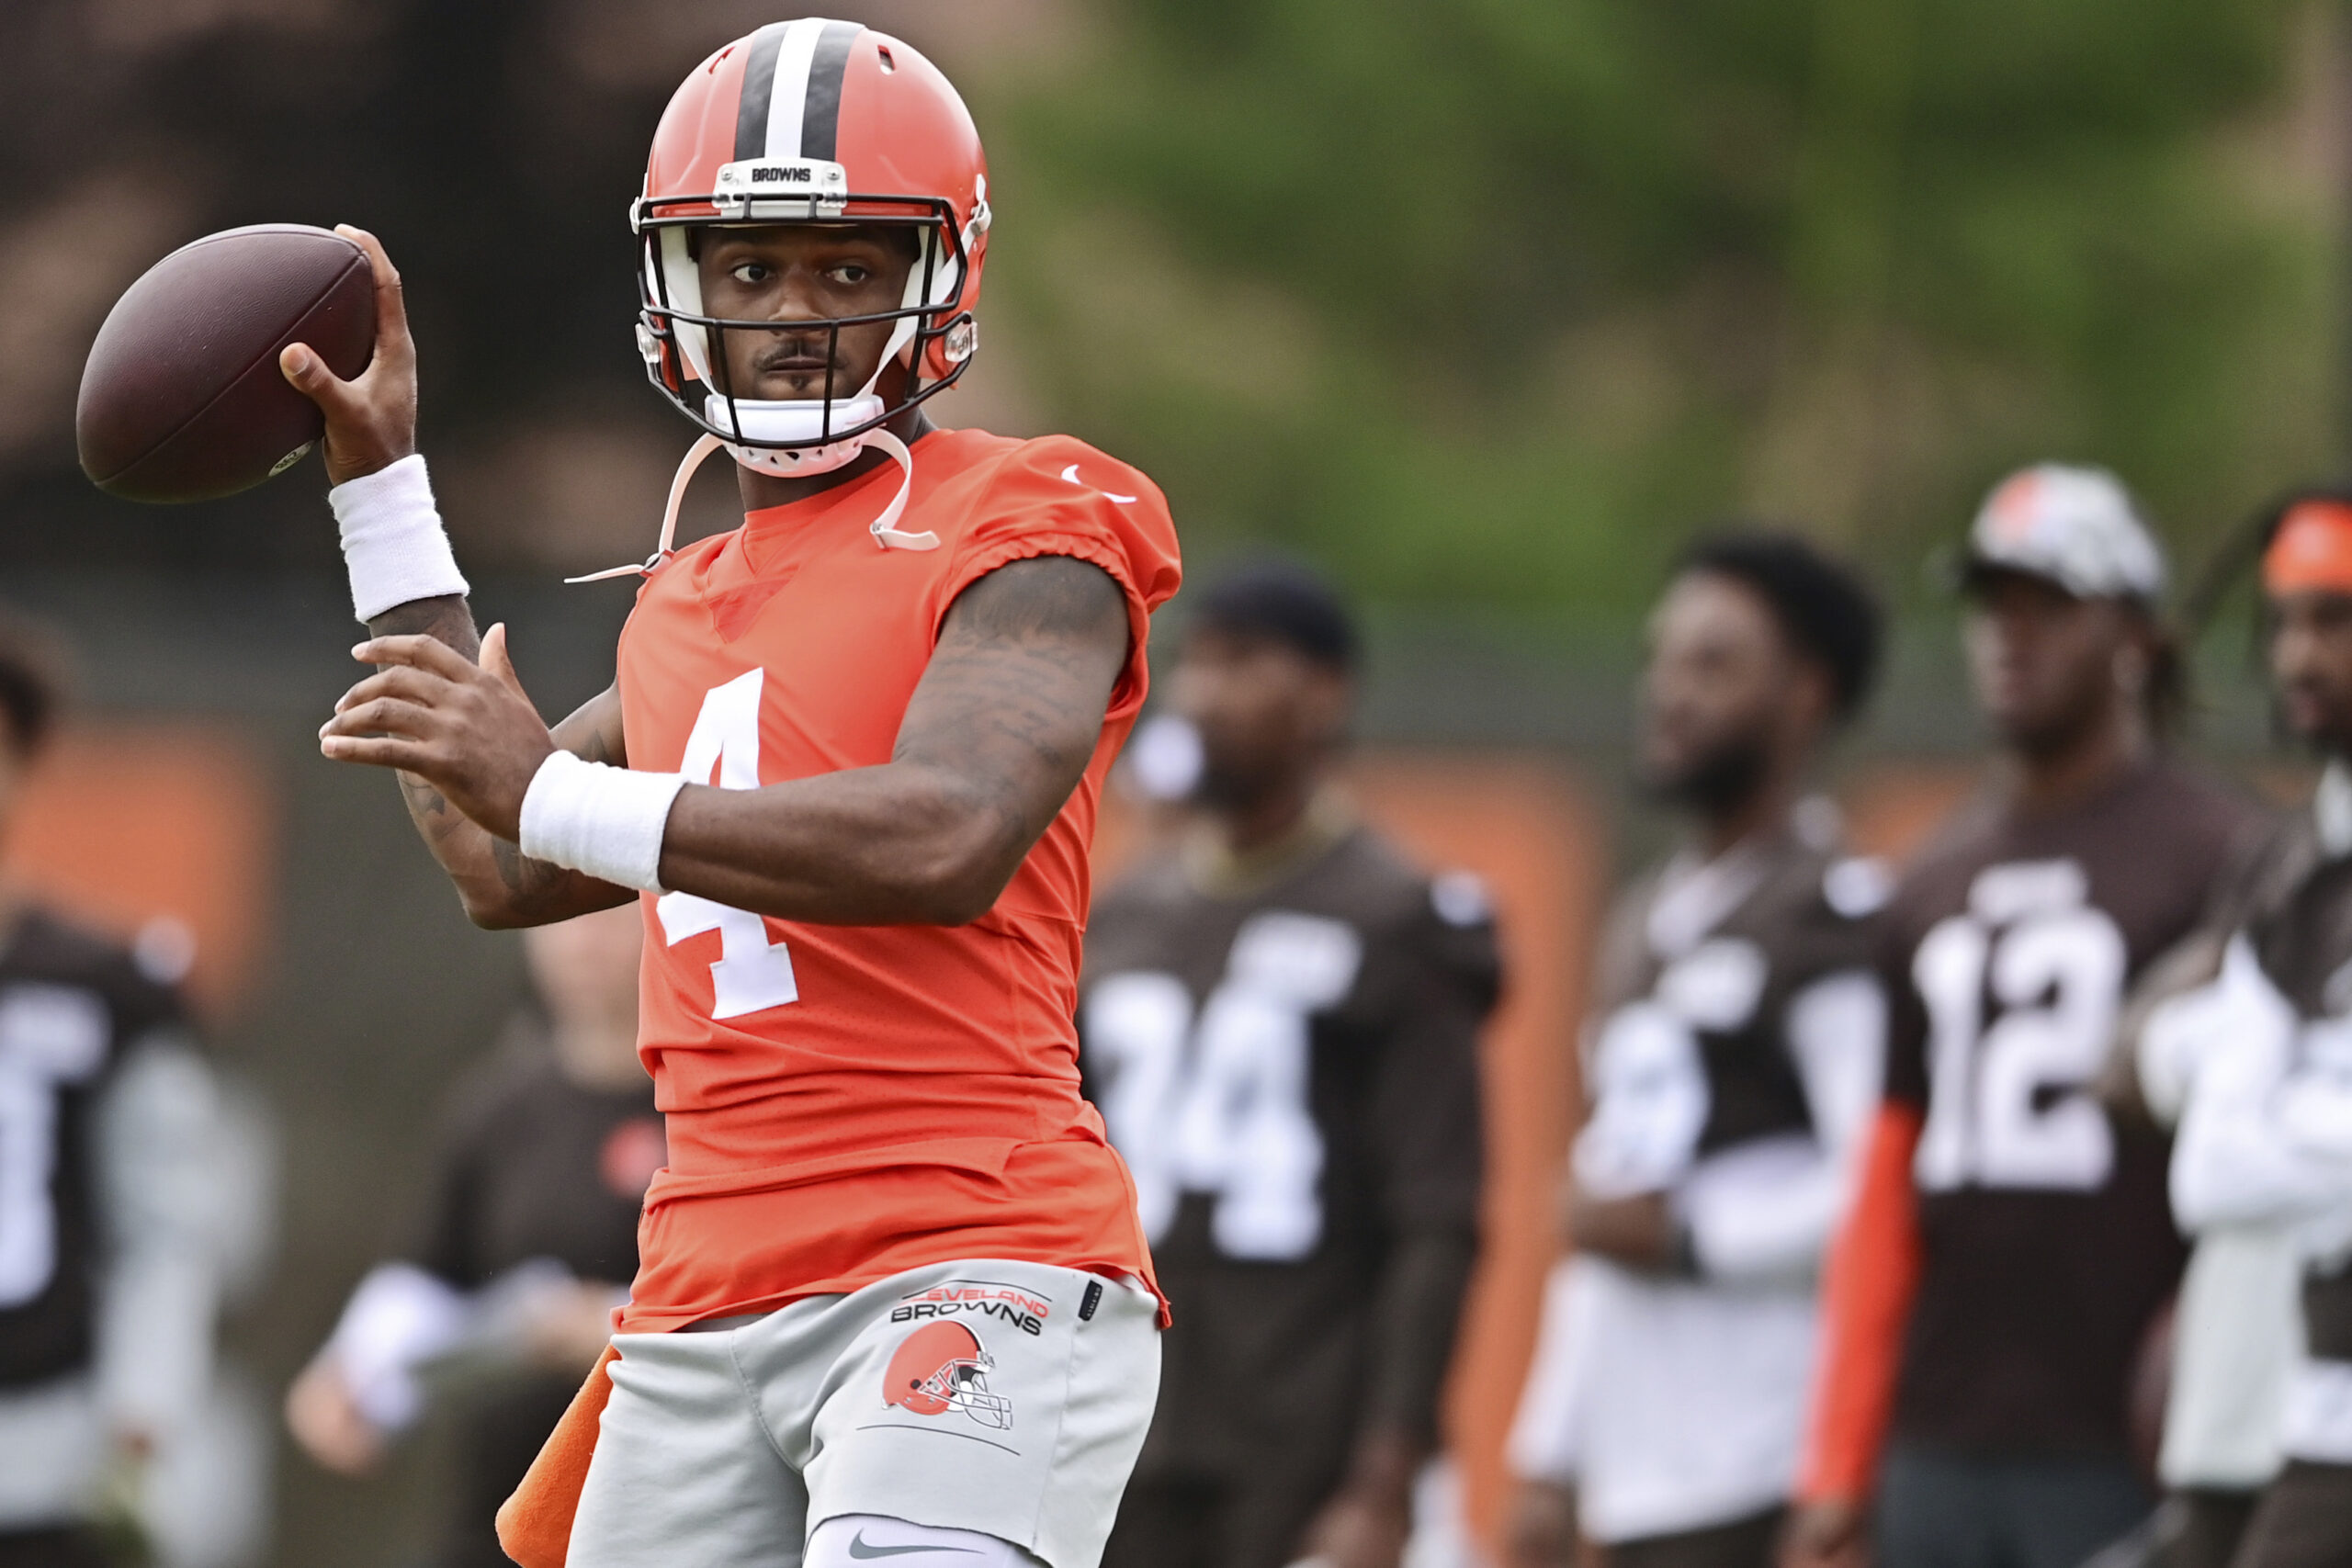 FILE - Cleveland Browns quarterback Deshaun Watson throws during NFL football practice in Berea, Ohio, Sunday, Aug. 14, 2022. A person familiar with the situation tells The Associated Press on Thursday, Aug. 18, 2022, that Watson has reached a settlement with the NFL and will serve an 11-game suspension and pay a $5 million fine rather than risk missing his first season as quarterback of the Browns following accusations of sexual misconduct while he played for the Houston Texans. (AP Photo/David Dermer, File)